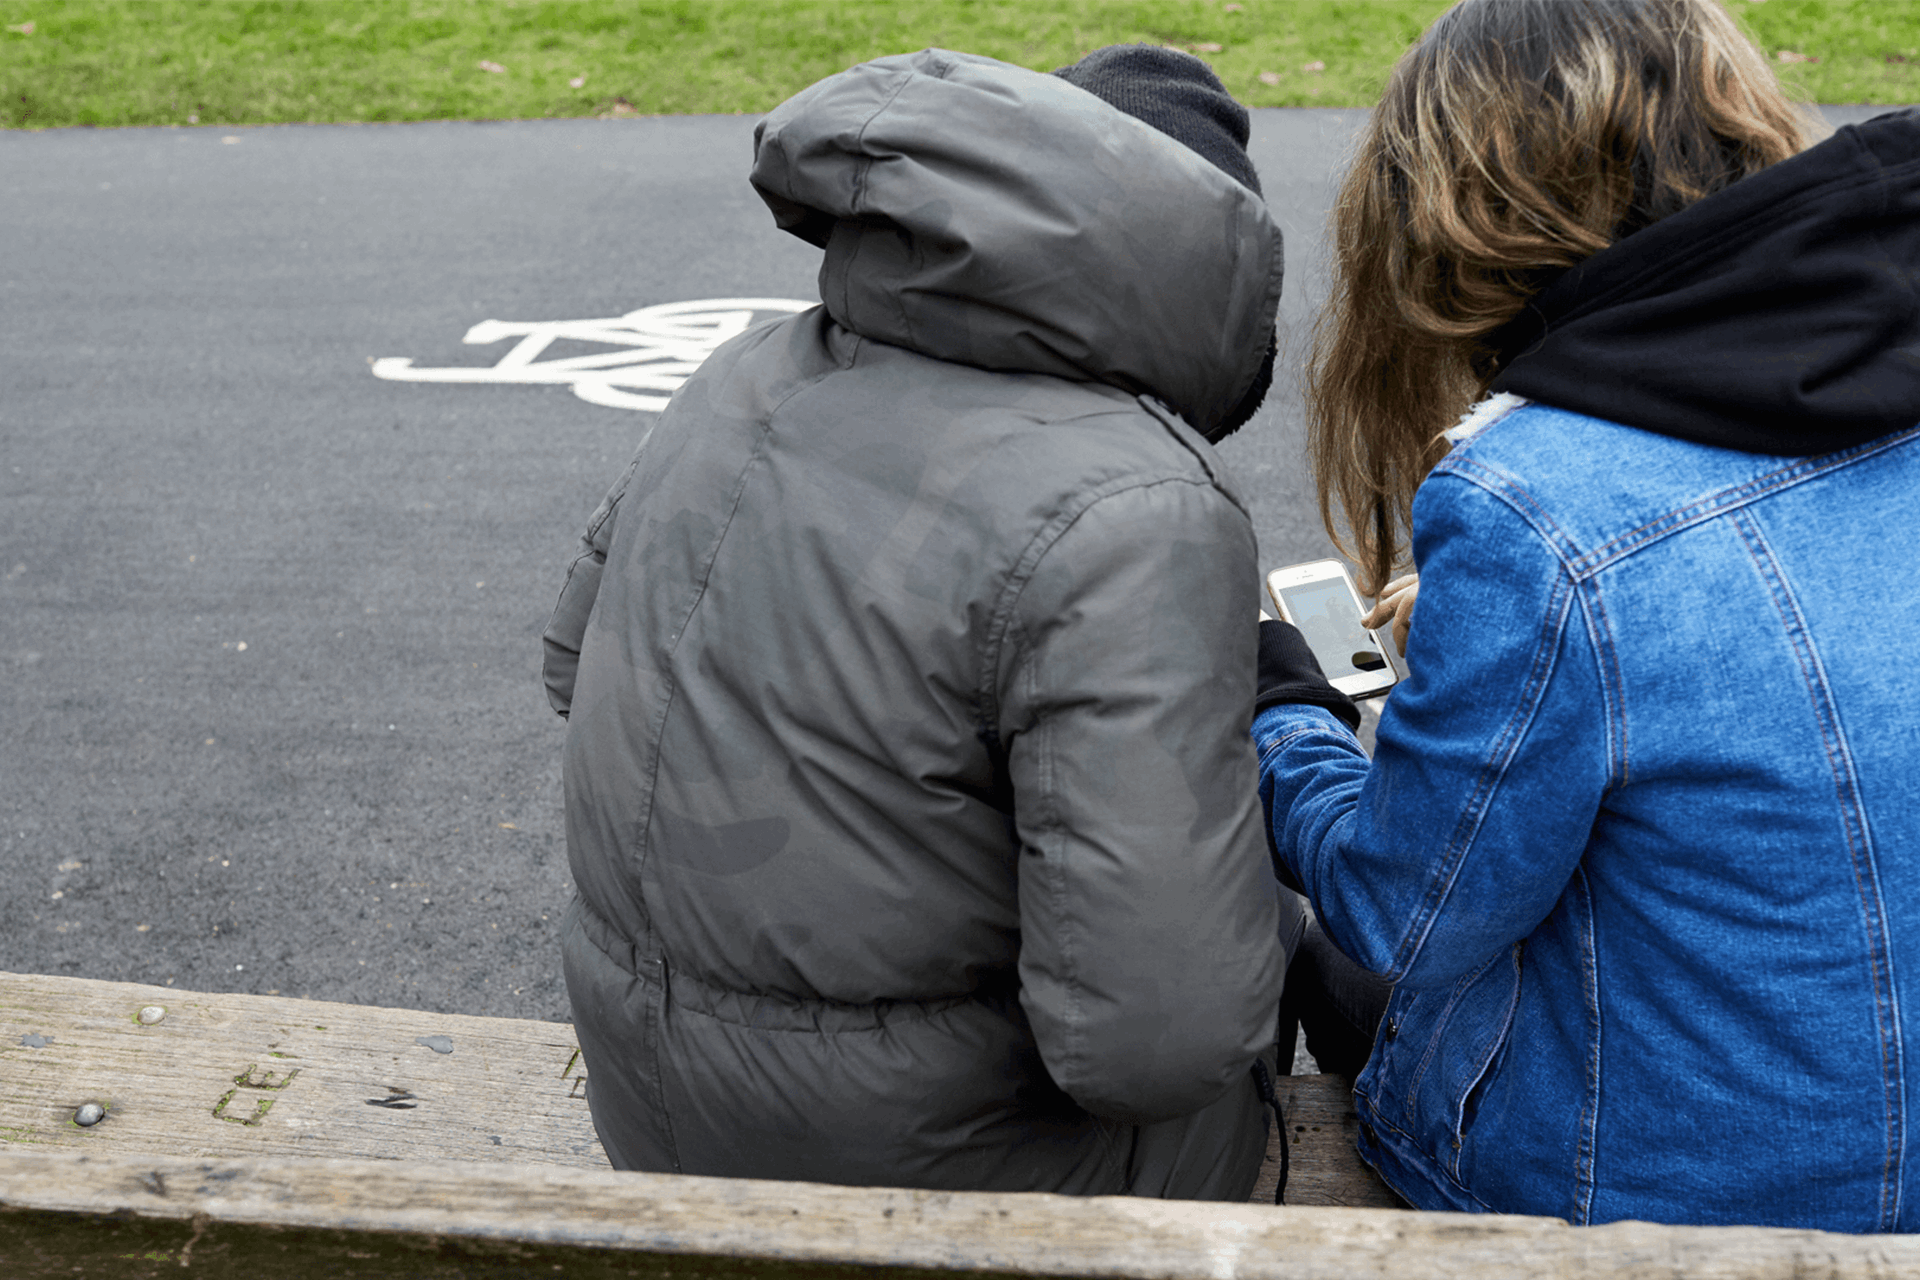 backshot of two young people wearing winter jackets with face unseen looking at their phone while sitting on a bench beside the street